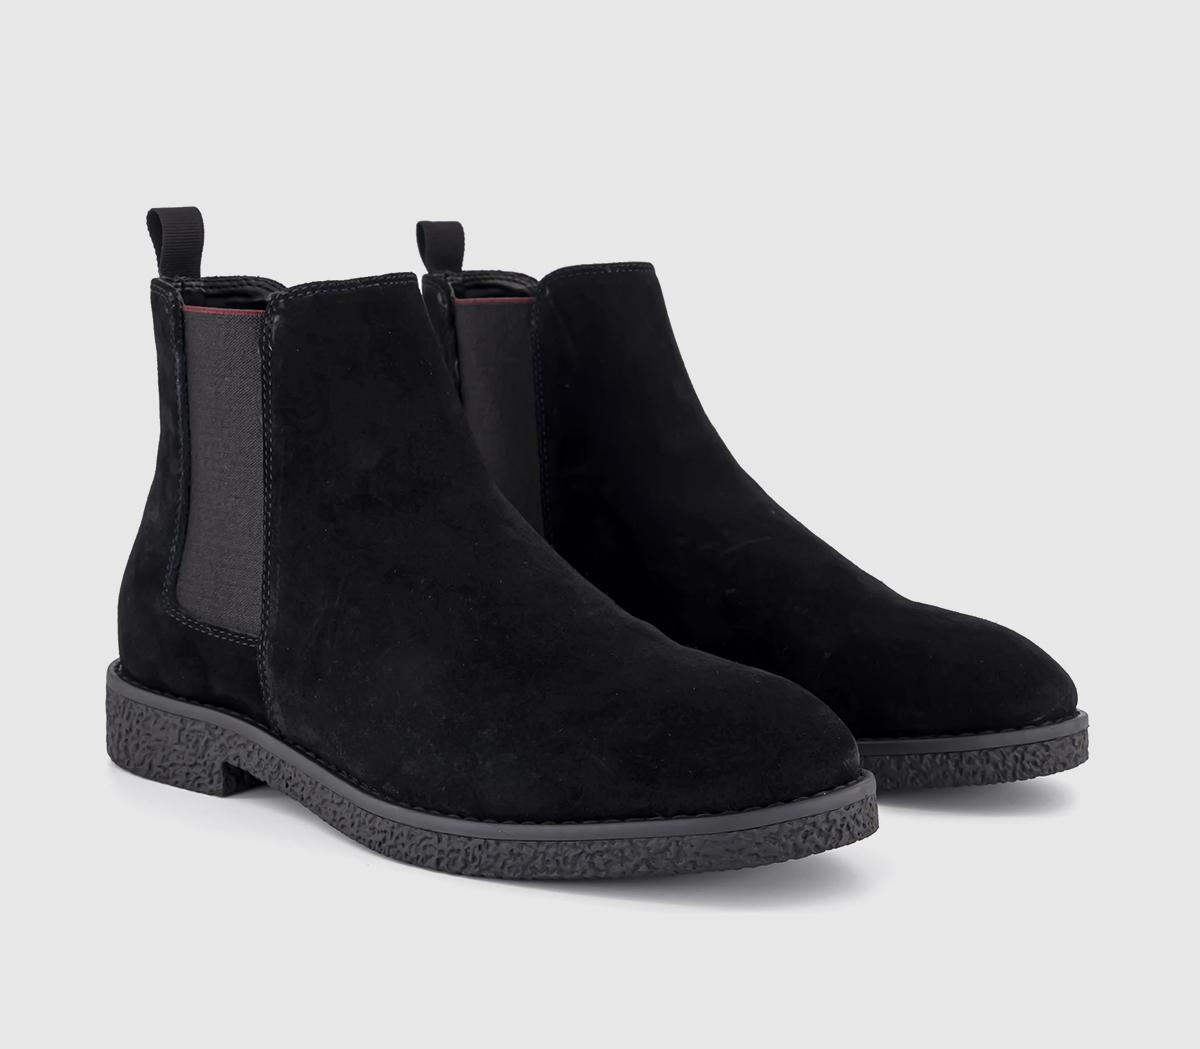 OFFICE Mens Bachelor Crepe Look Chelsea Boots Black Suede, 9